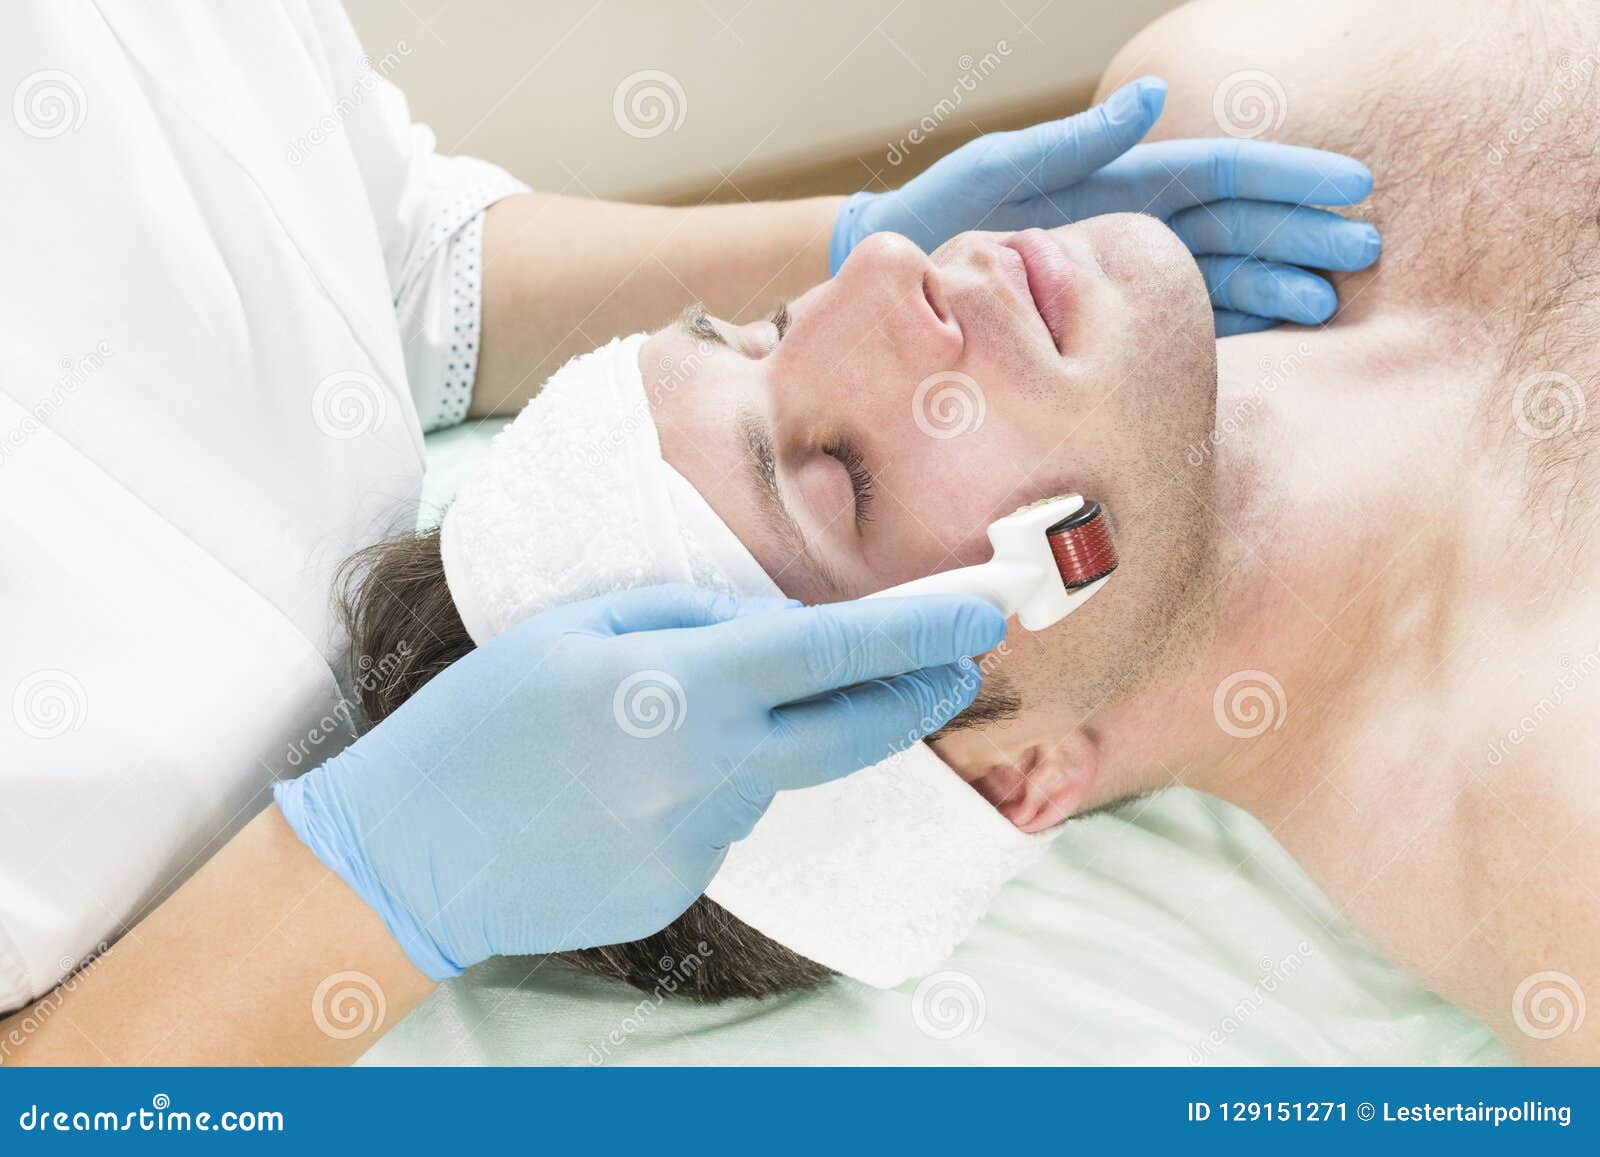 man undergoes the procedure of medical micro needle therapy with a modern medical instrument derma roller.